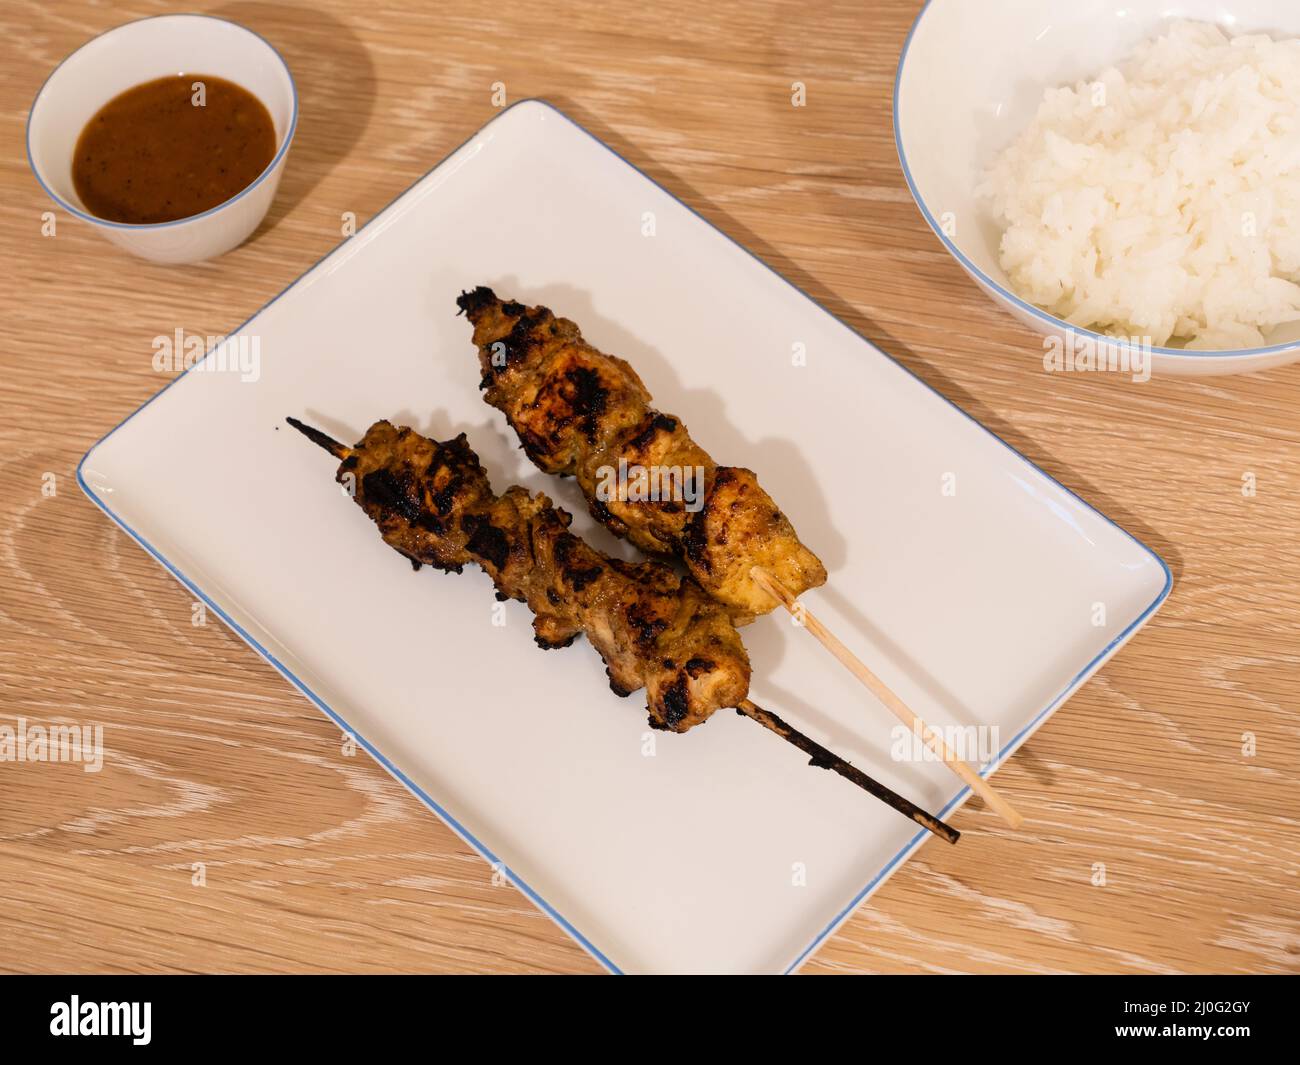 Grilled Chicken Satay BBQ Skewer or Sate ayam with Rice and Peanut Sauce Stock Photo